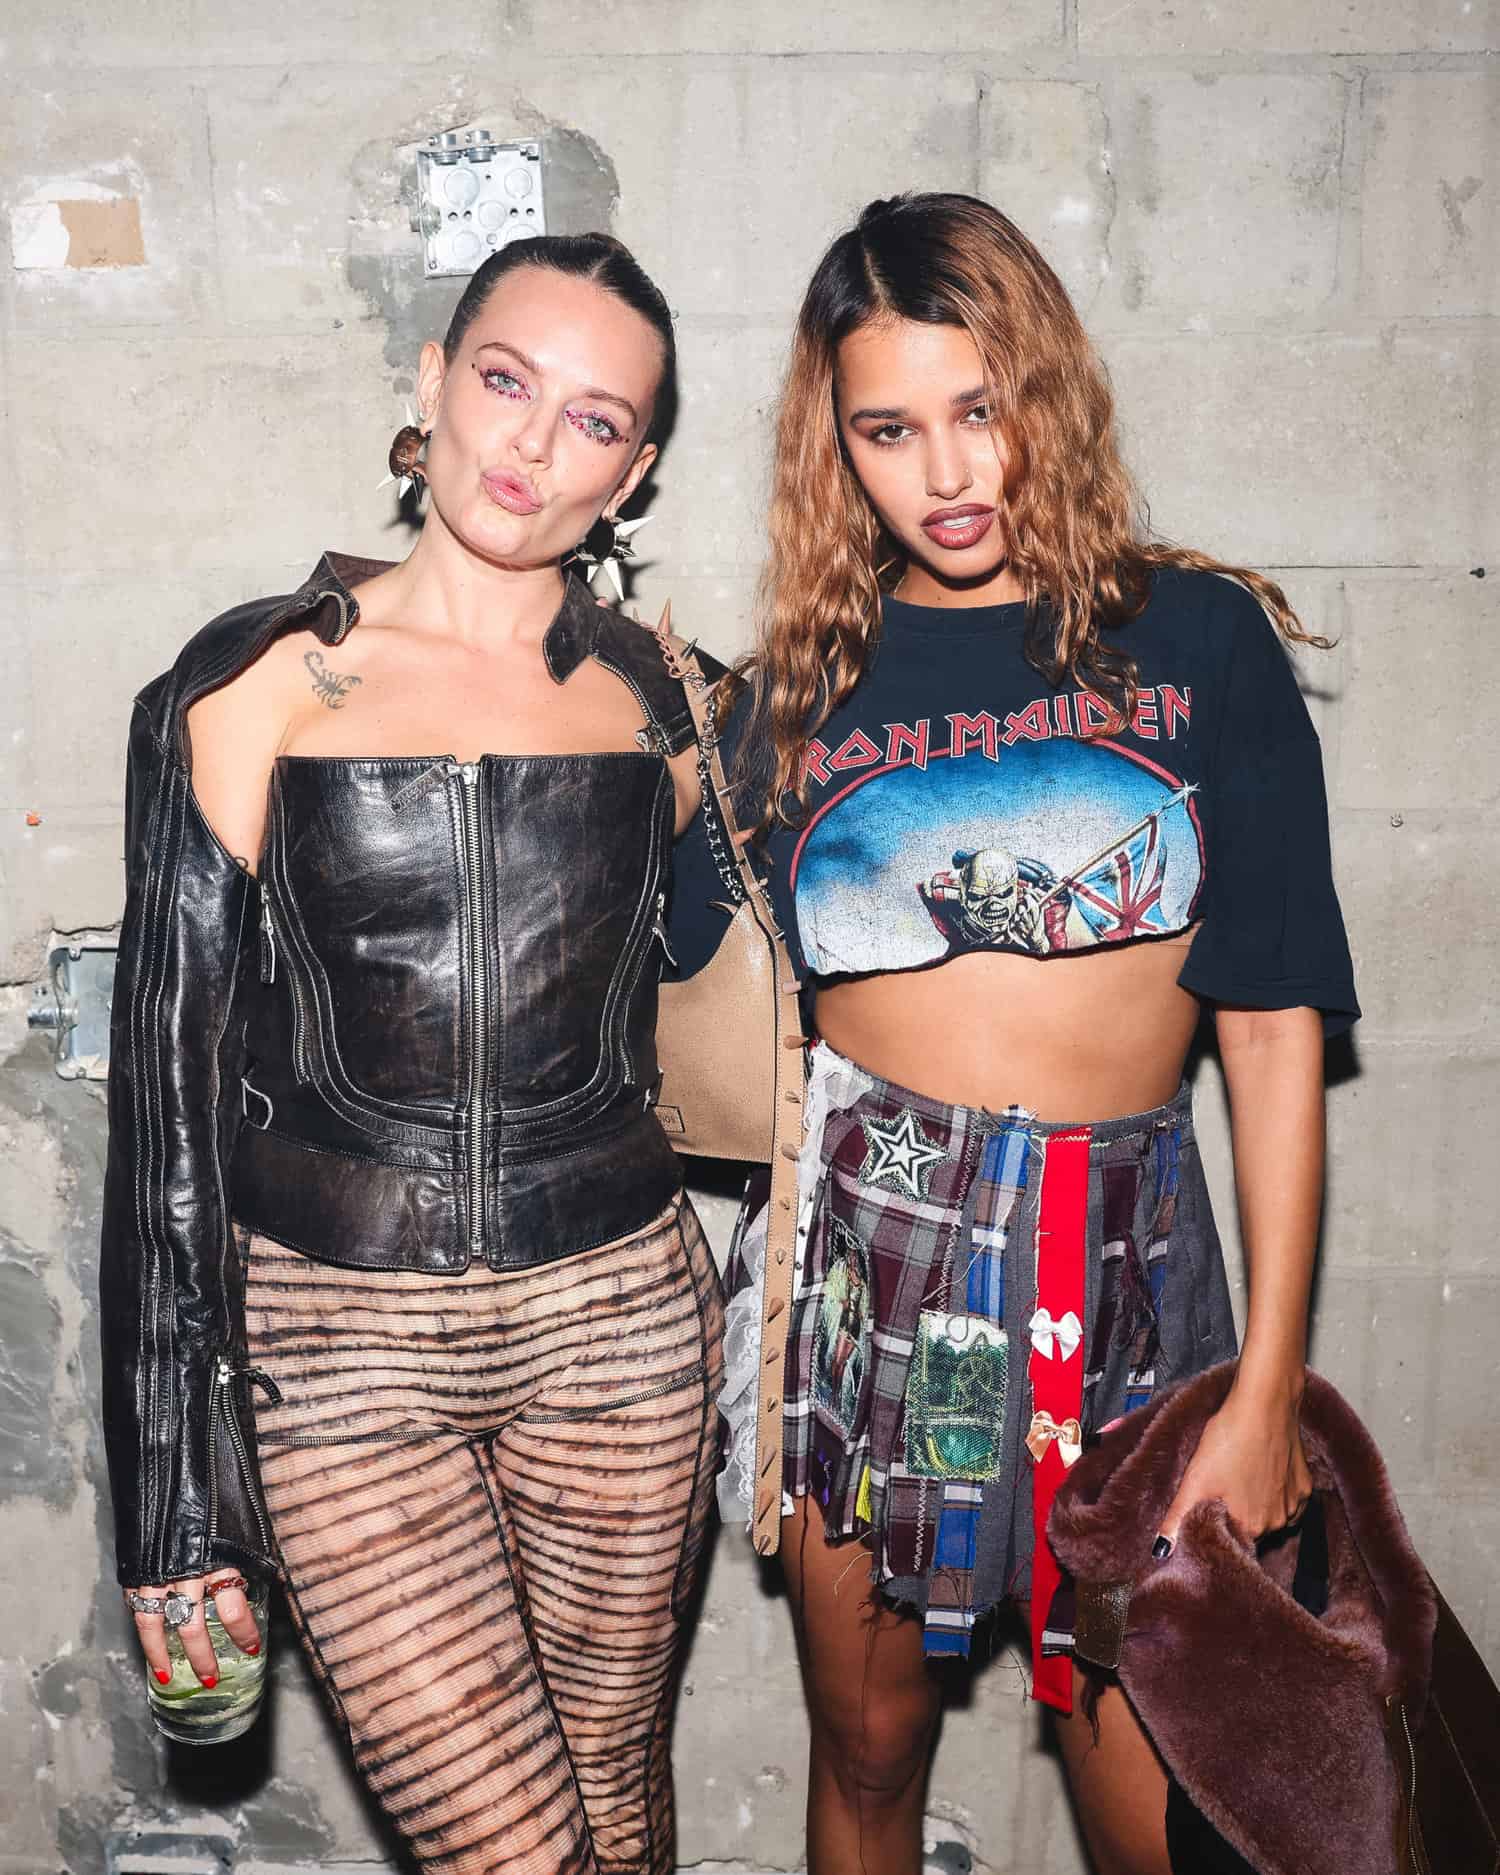 JEAN PAUL GAULTIER AND KNWLS HOST PARTY WITH SSENSE AT NEW YORK FASHION  WEEK TO CELEBRATE COLLABORATION LAUNCH - MR Magazine